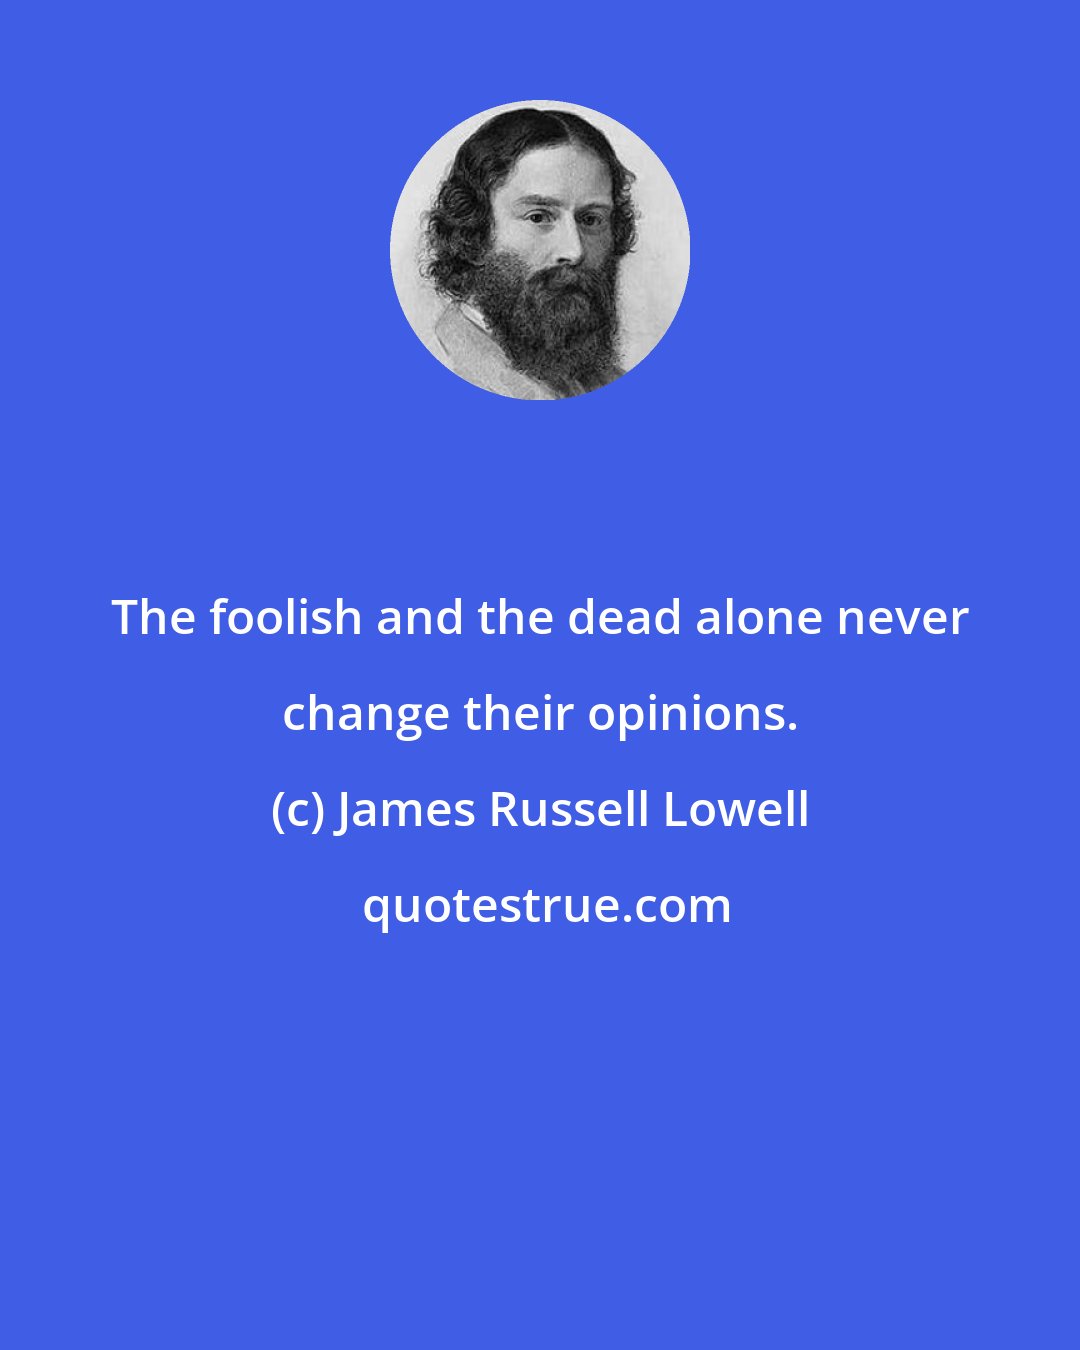 James Russell Lowell: The foolish and the dead alone never change their opinions.